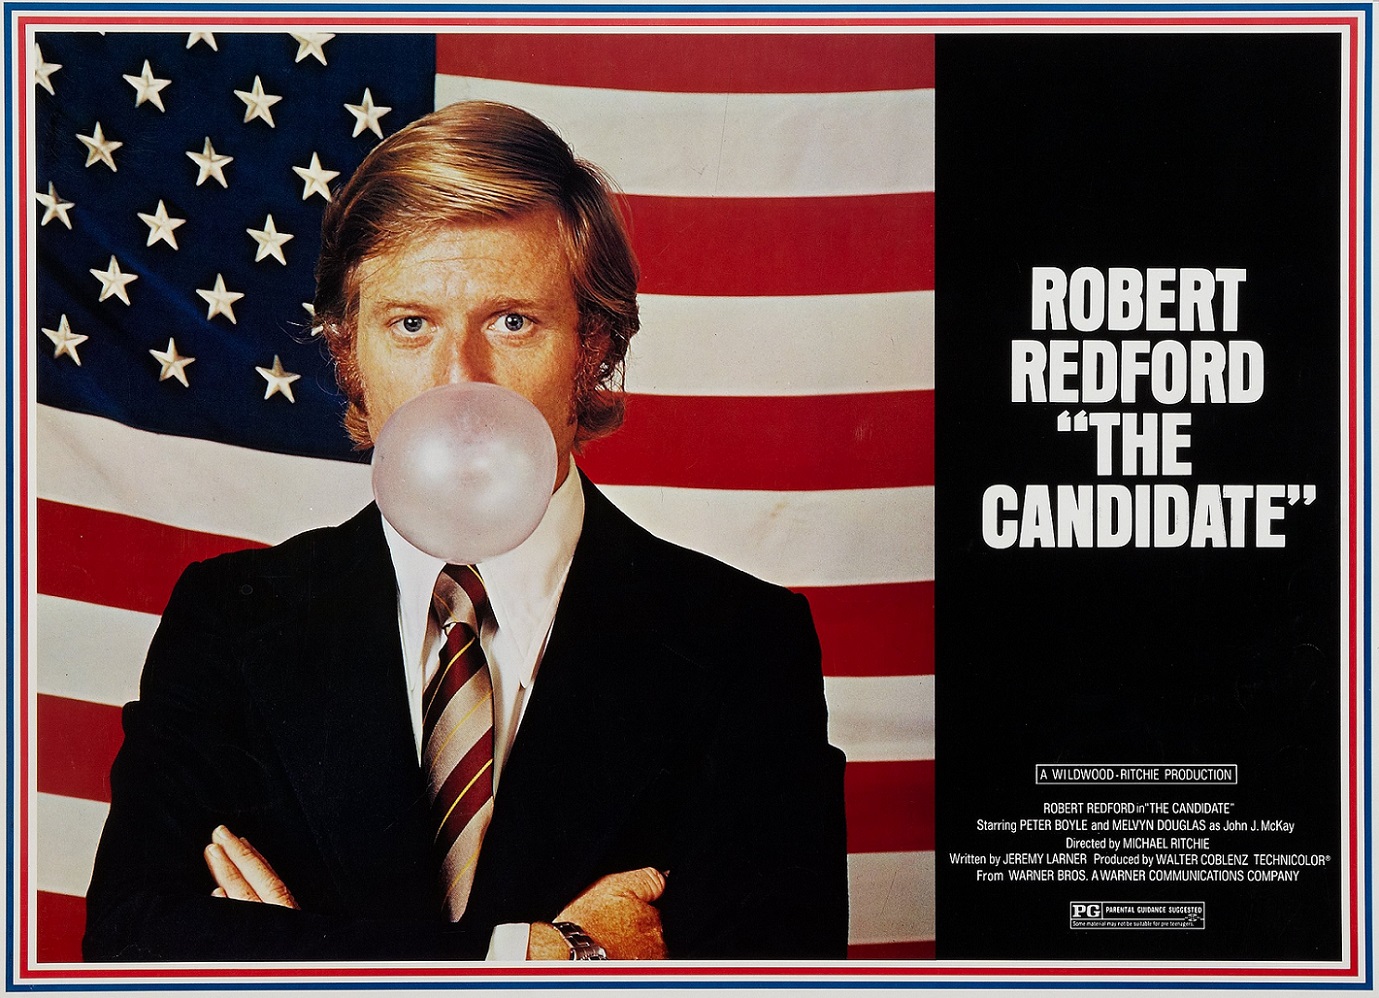 THE CANDIDATE (1972) WEB SITE